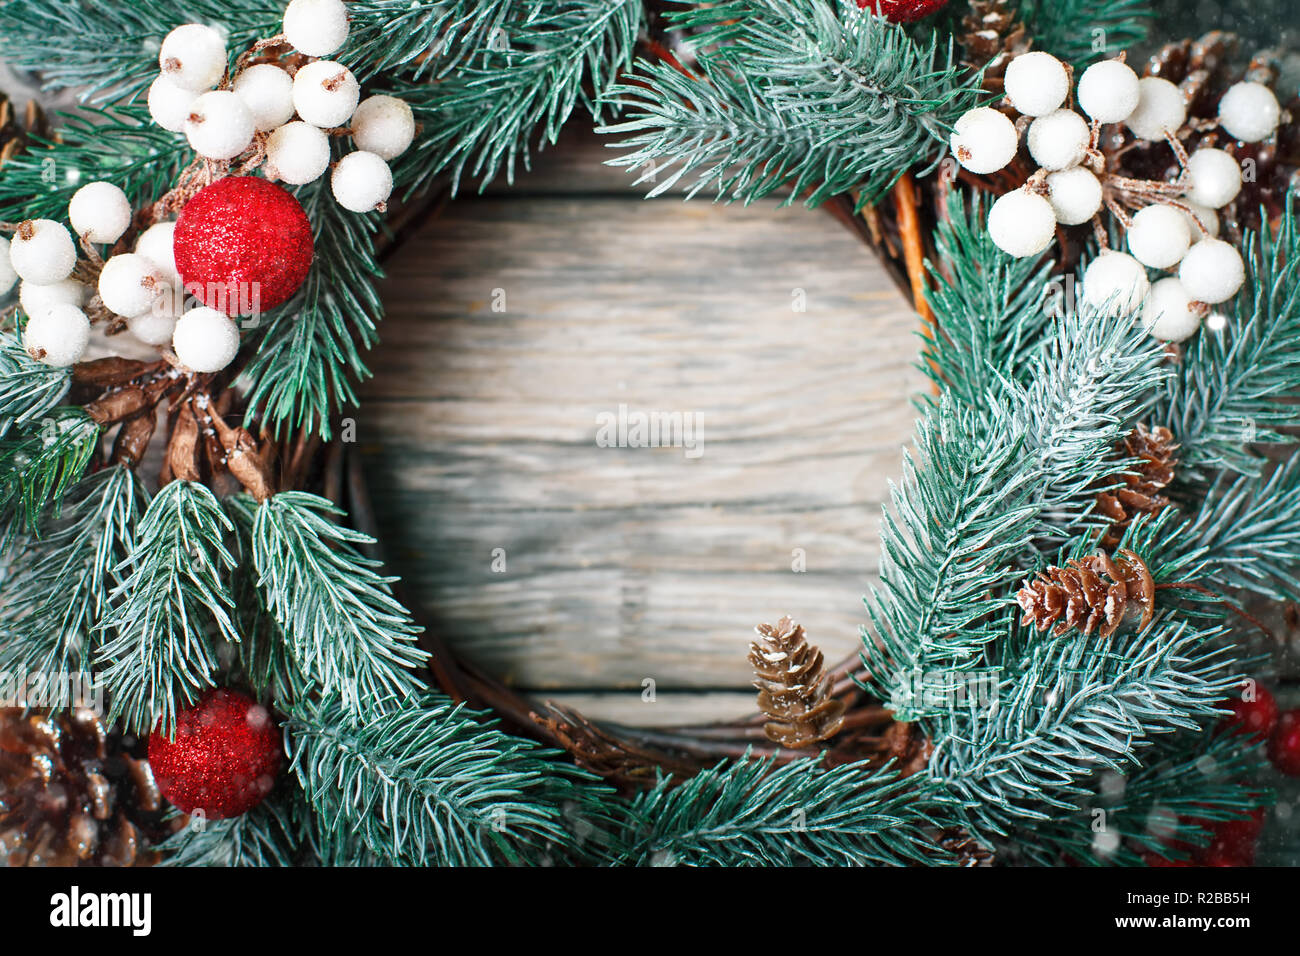 Merry Christmas and happy New year. Christmas decorative wreath on wooden background. Background with copy space. Horizontal. Selective focus. Stock Photo